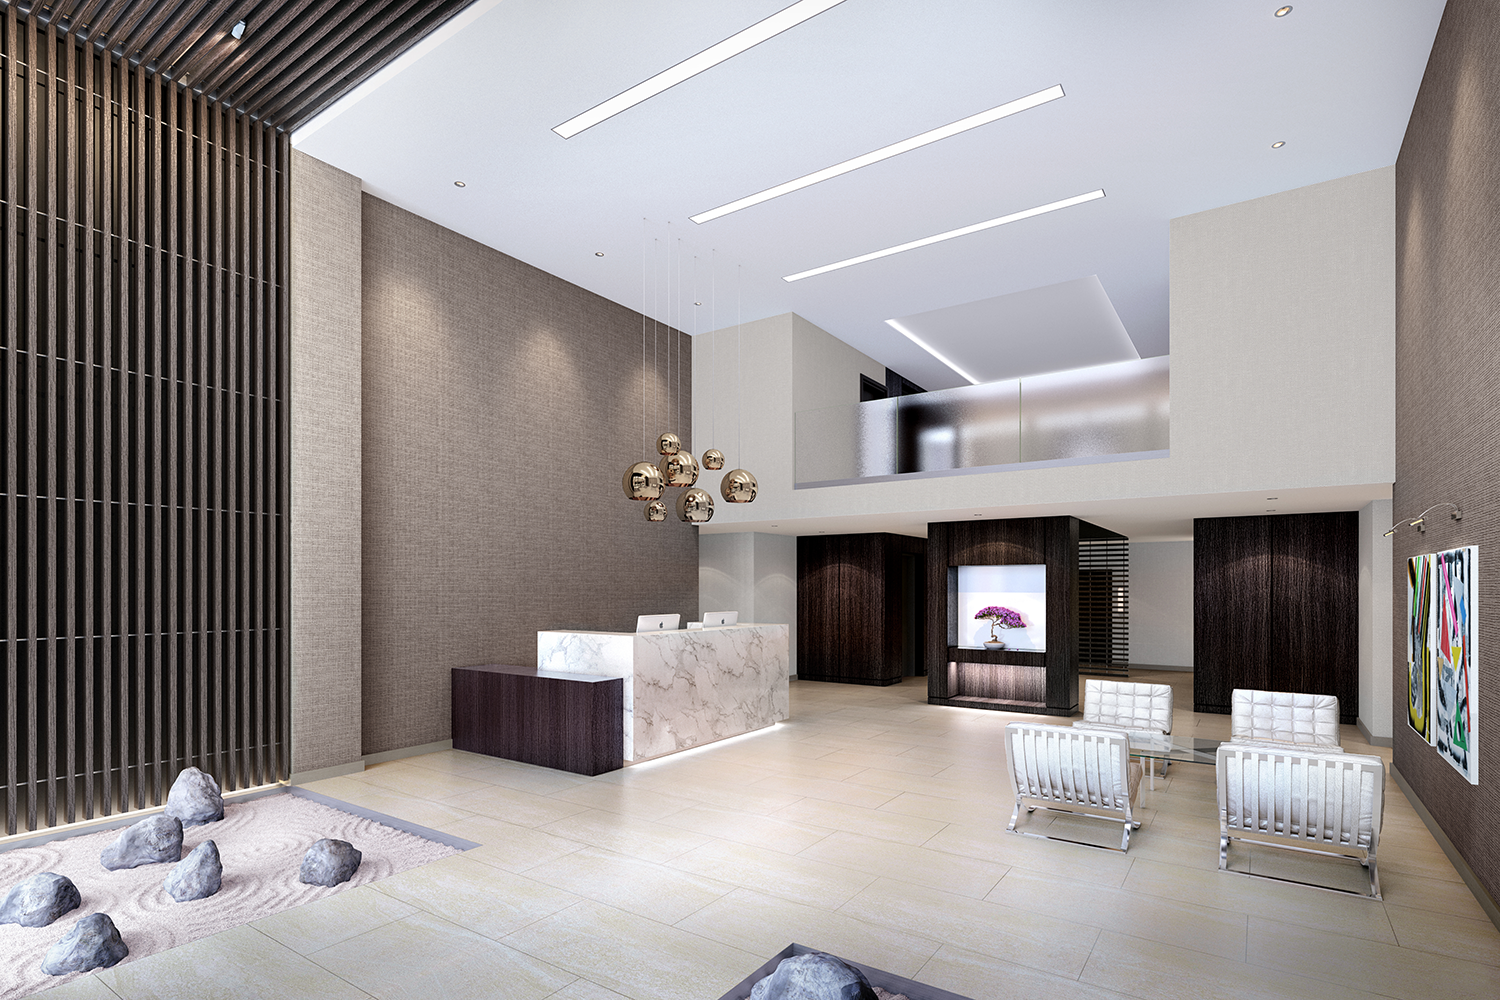 The grand lobby of the LuXe is two stories and capacious in appearance, decorated with a light, contemporary color palette.